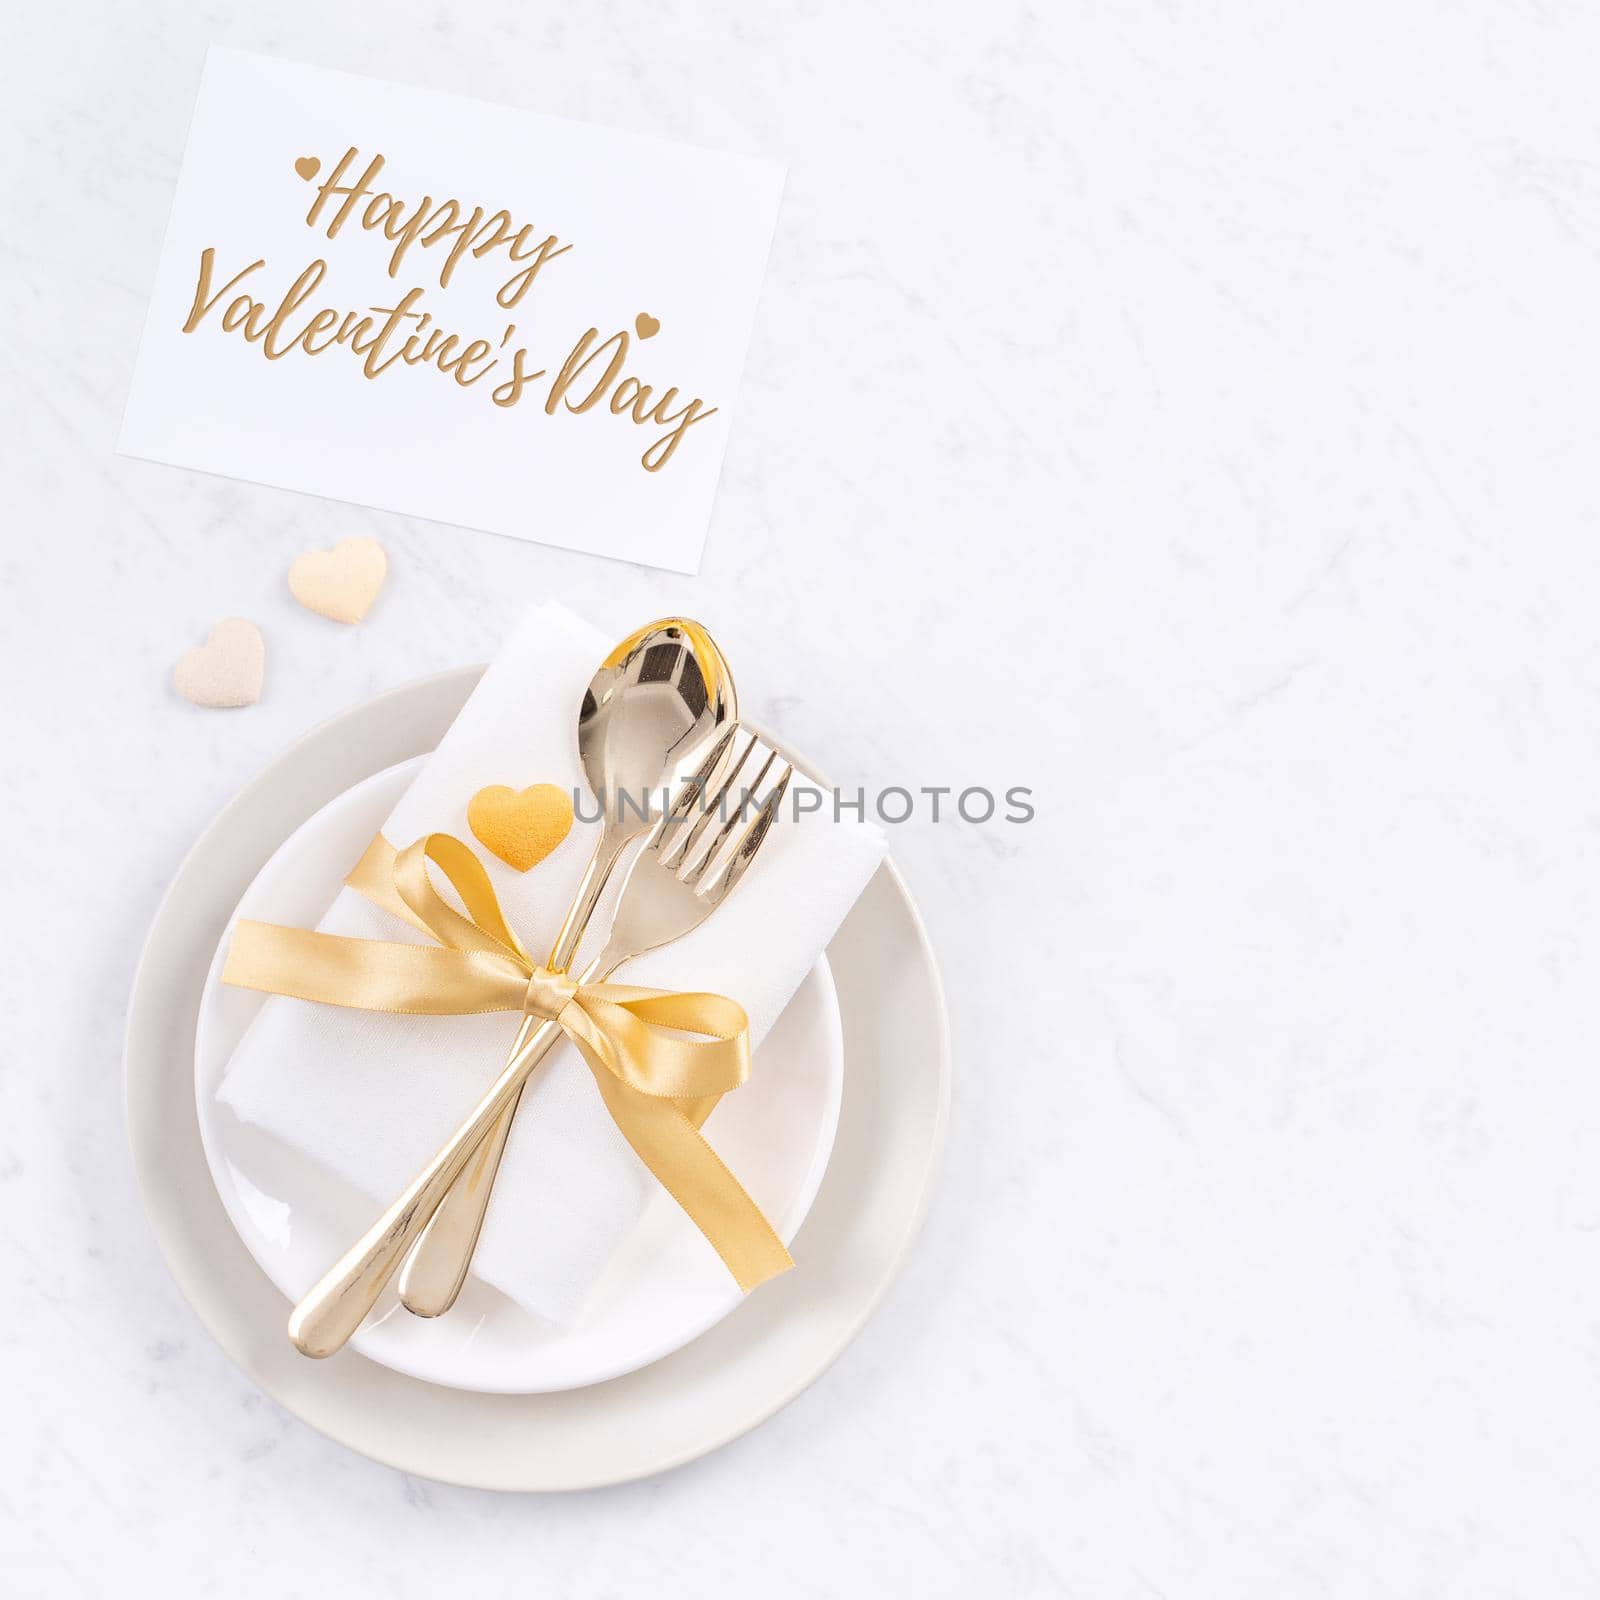 Valentine's Day holiday dating meal, banquet greeting card design concept - White plate and golden color tableware on marble background, top view, flat lay.